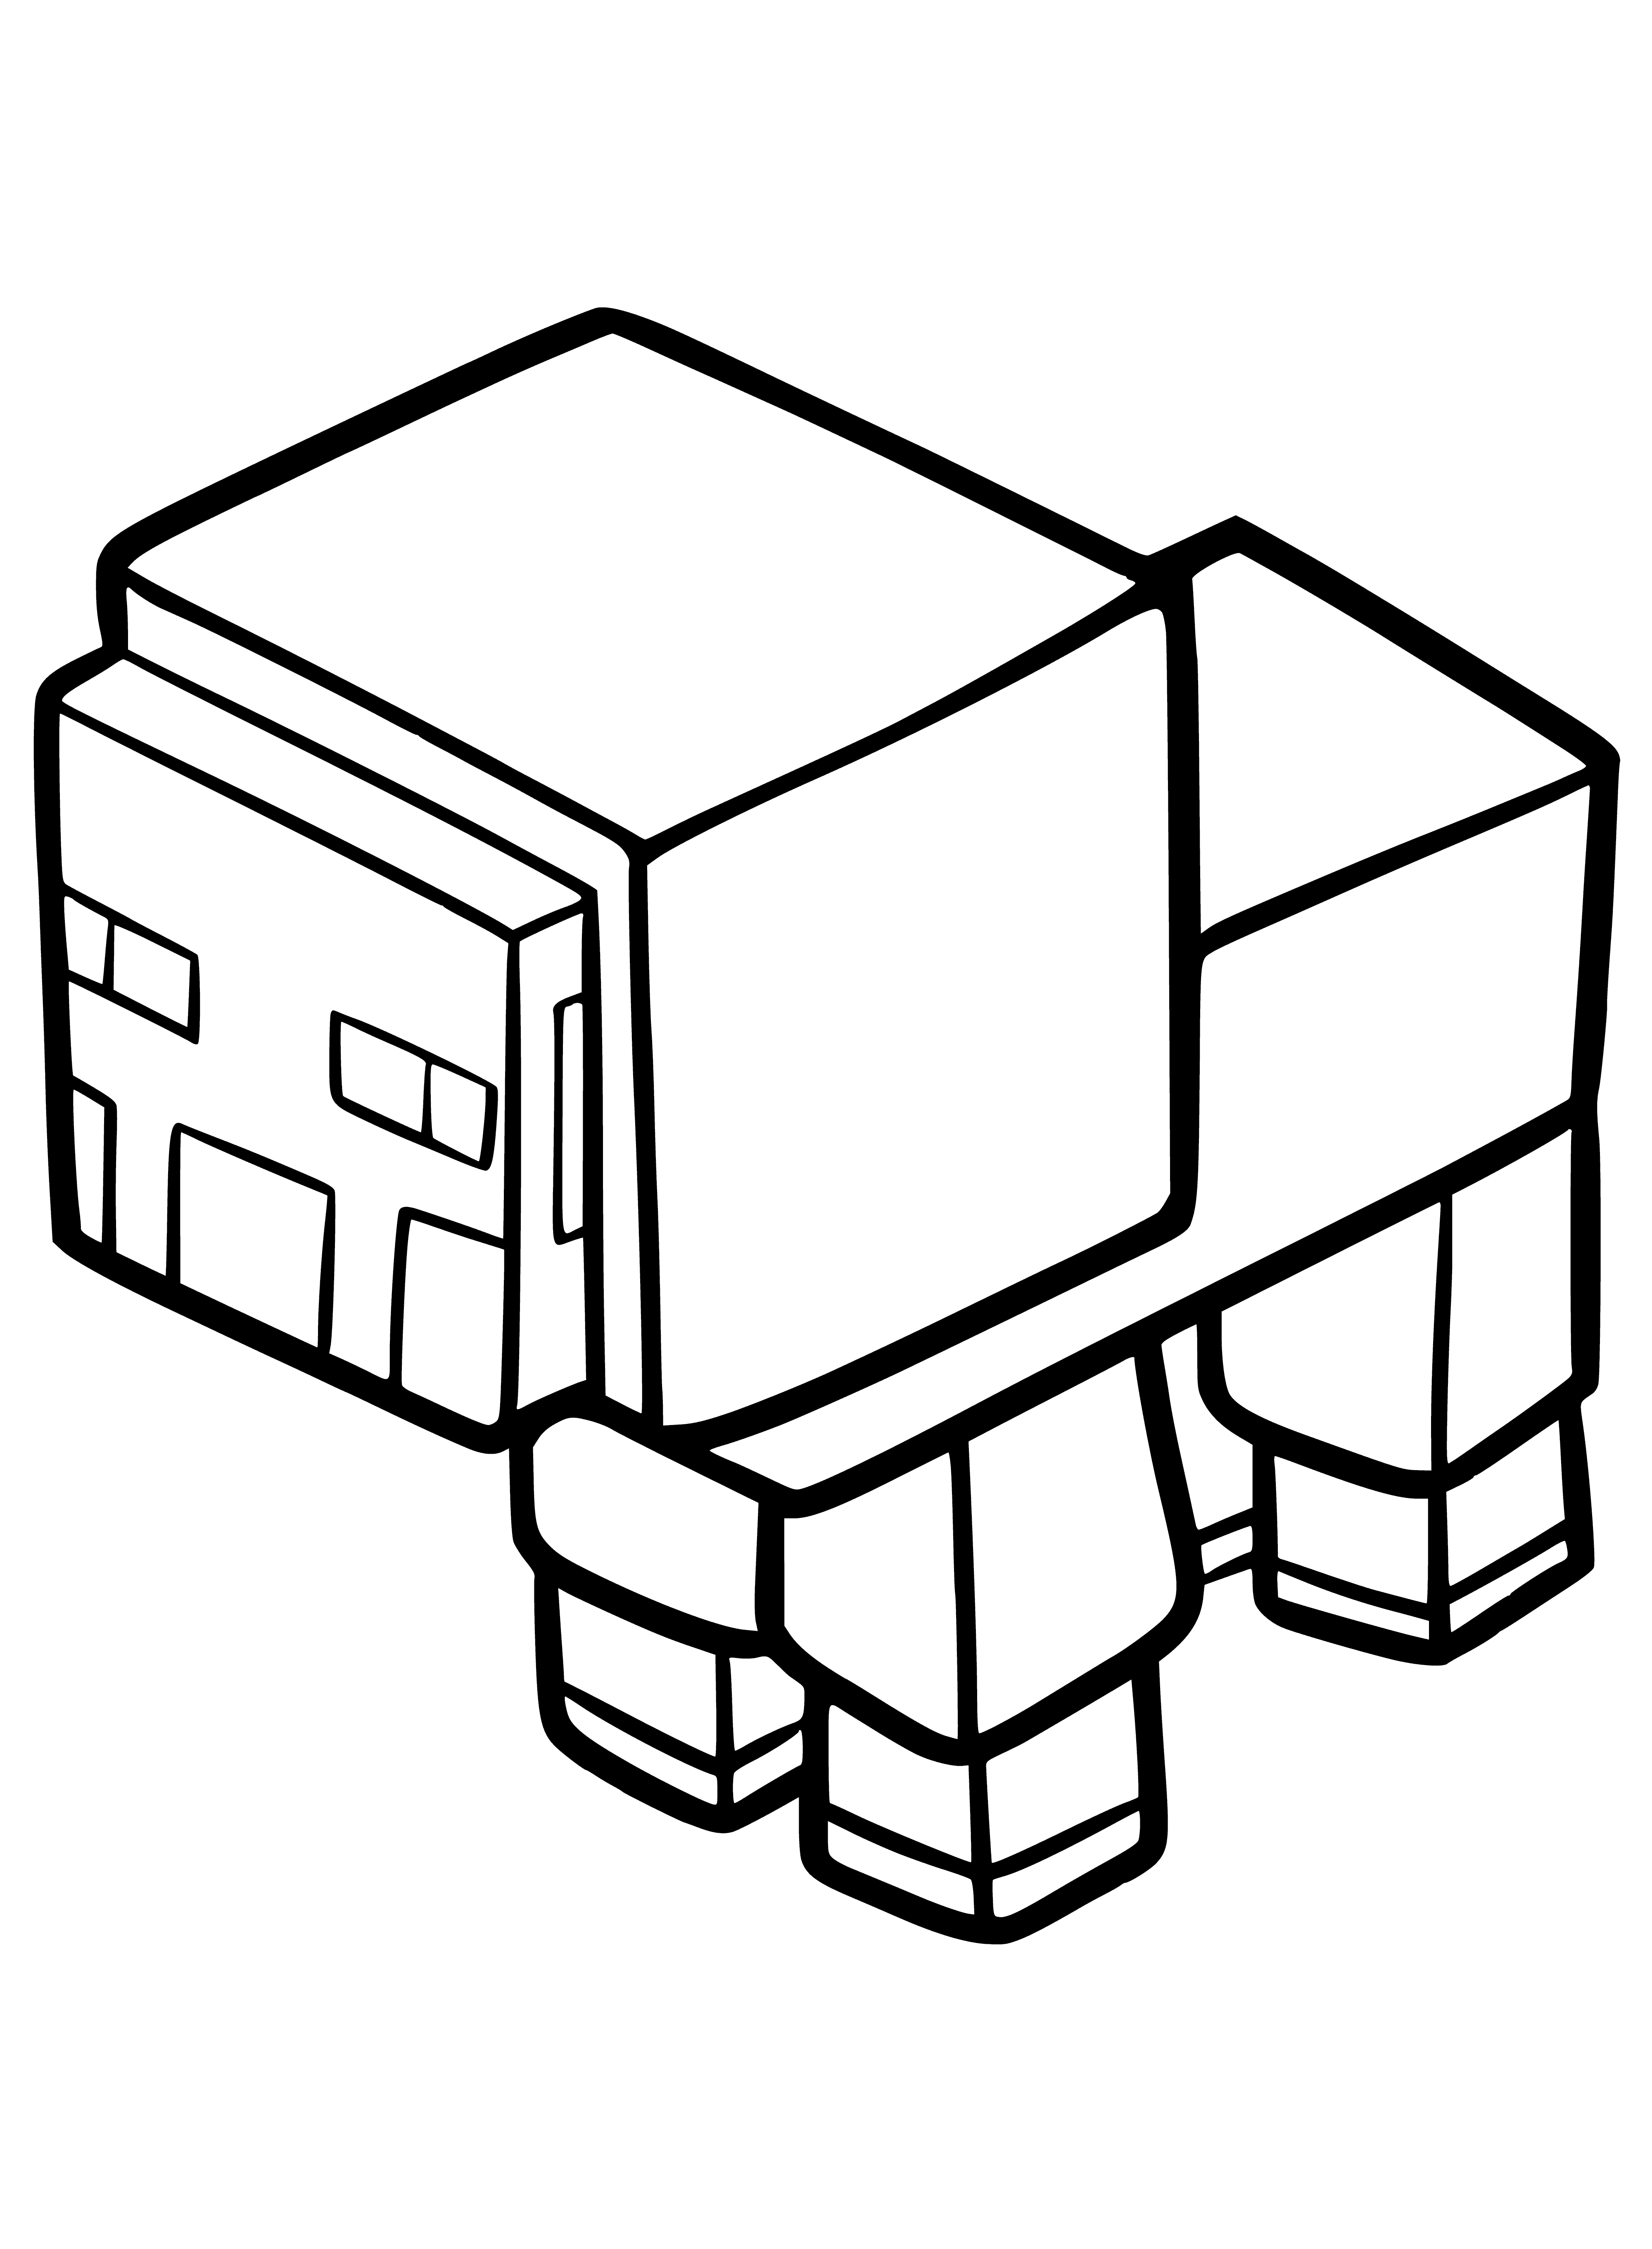 Minecraft Sheep coloring page